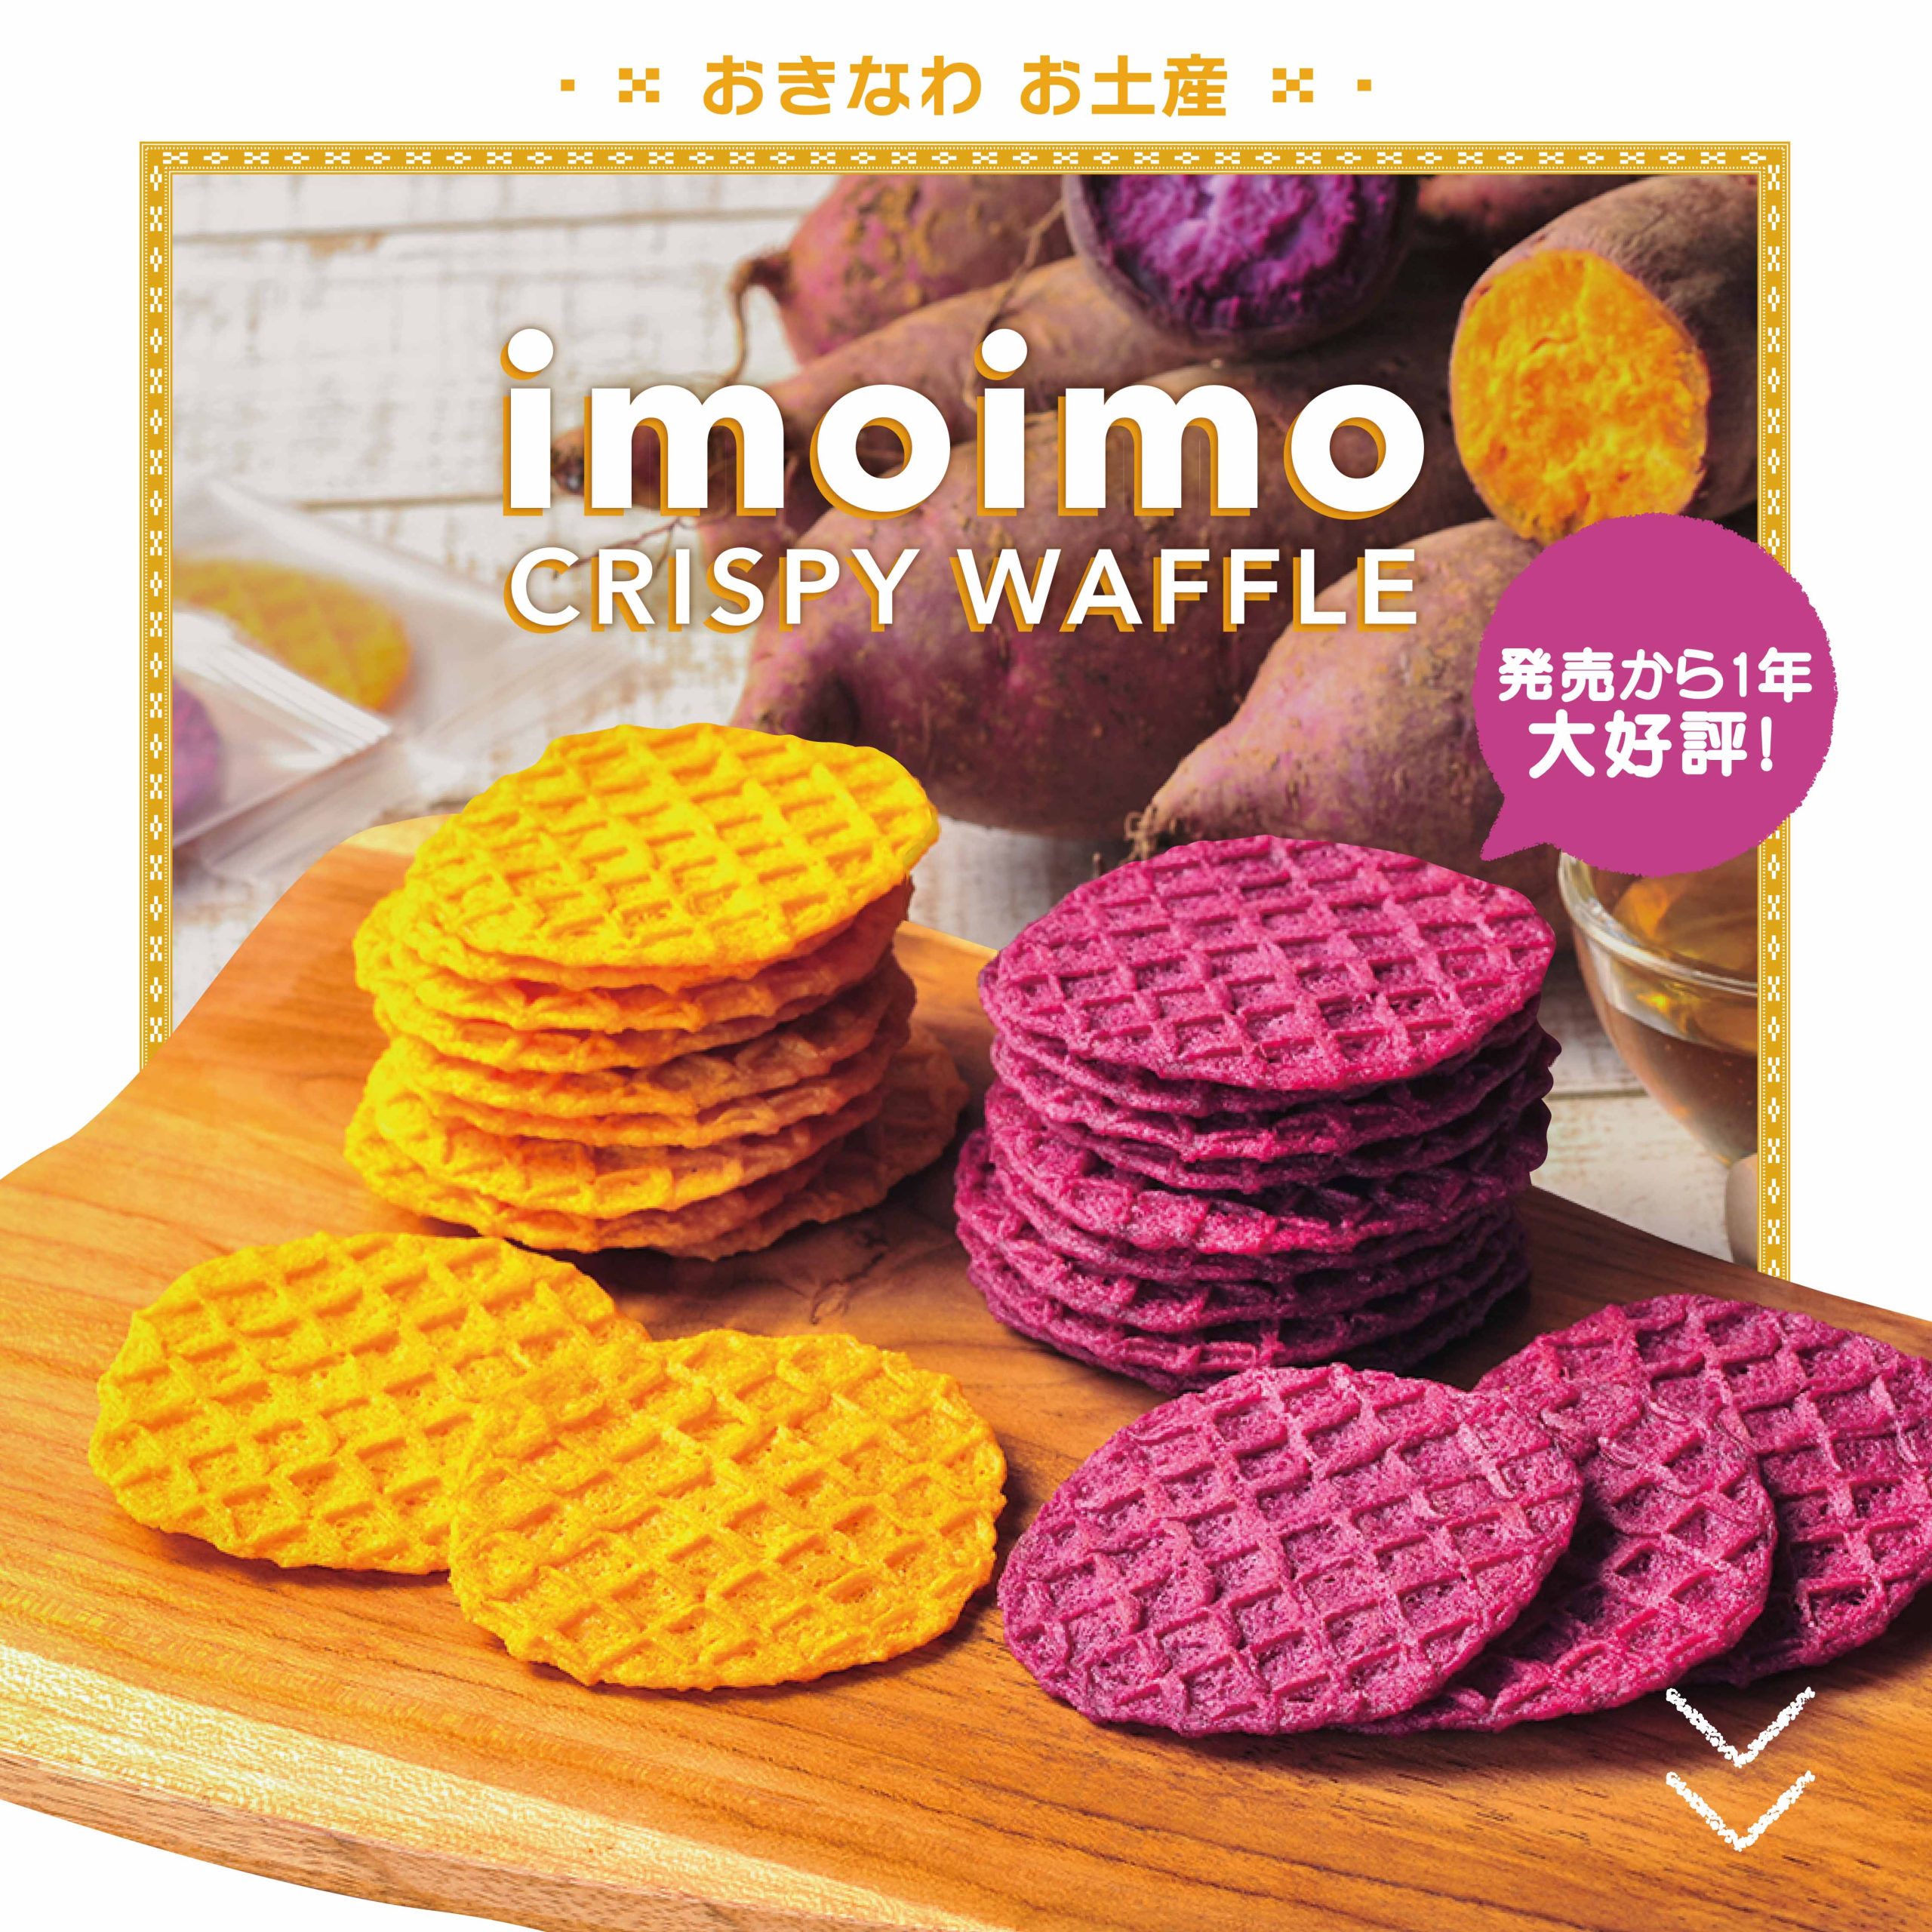 One year has passed since the release of Potato Crispy Waffles! Image of